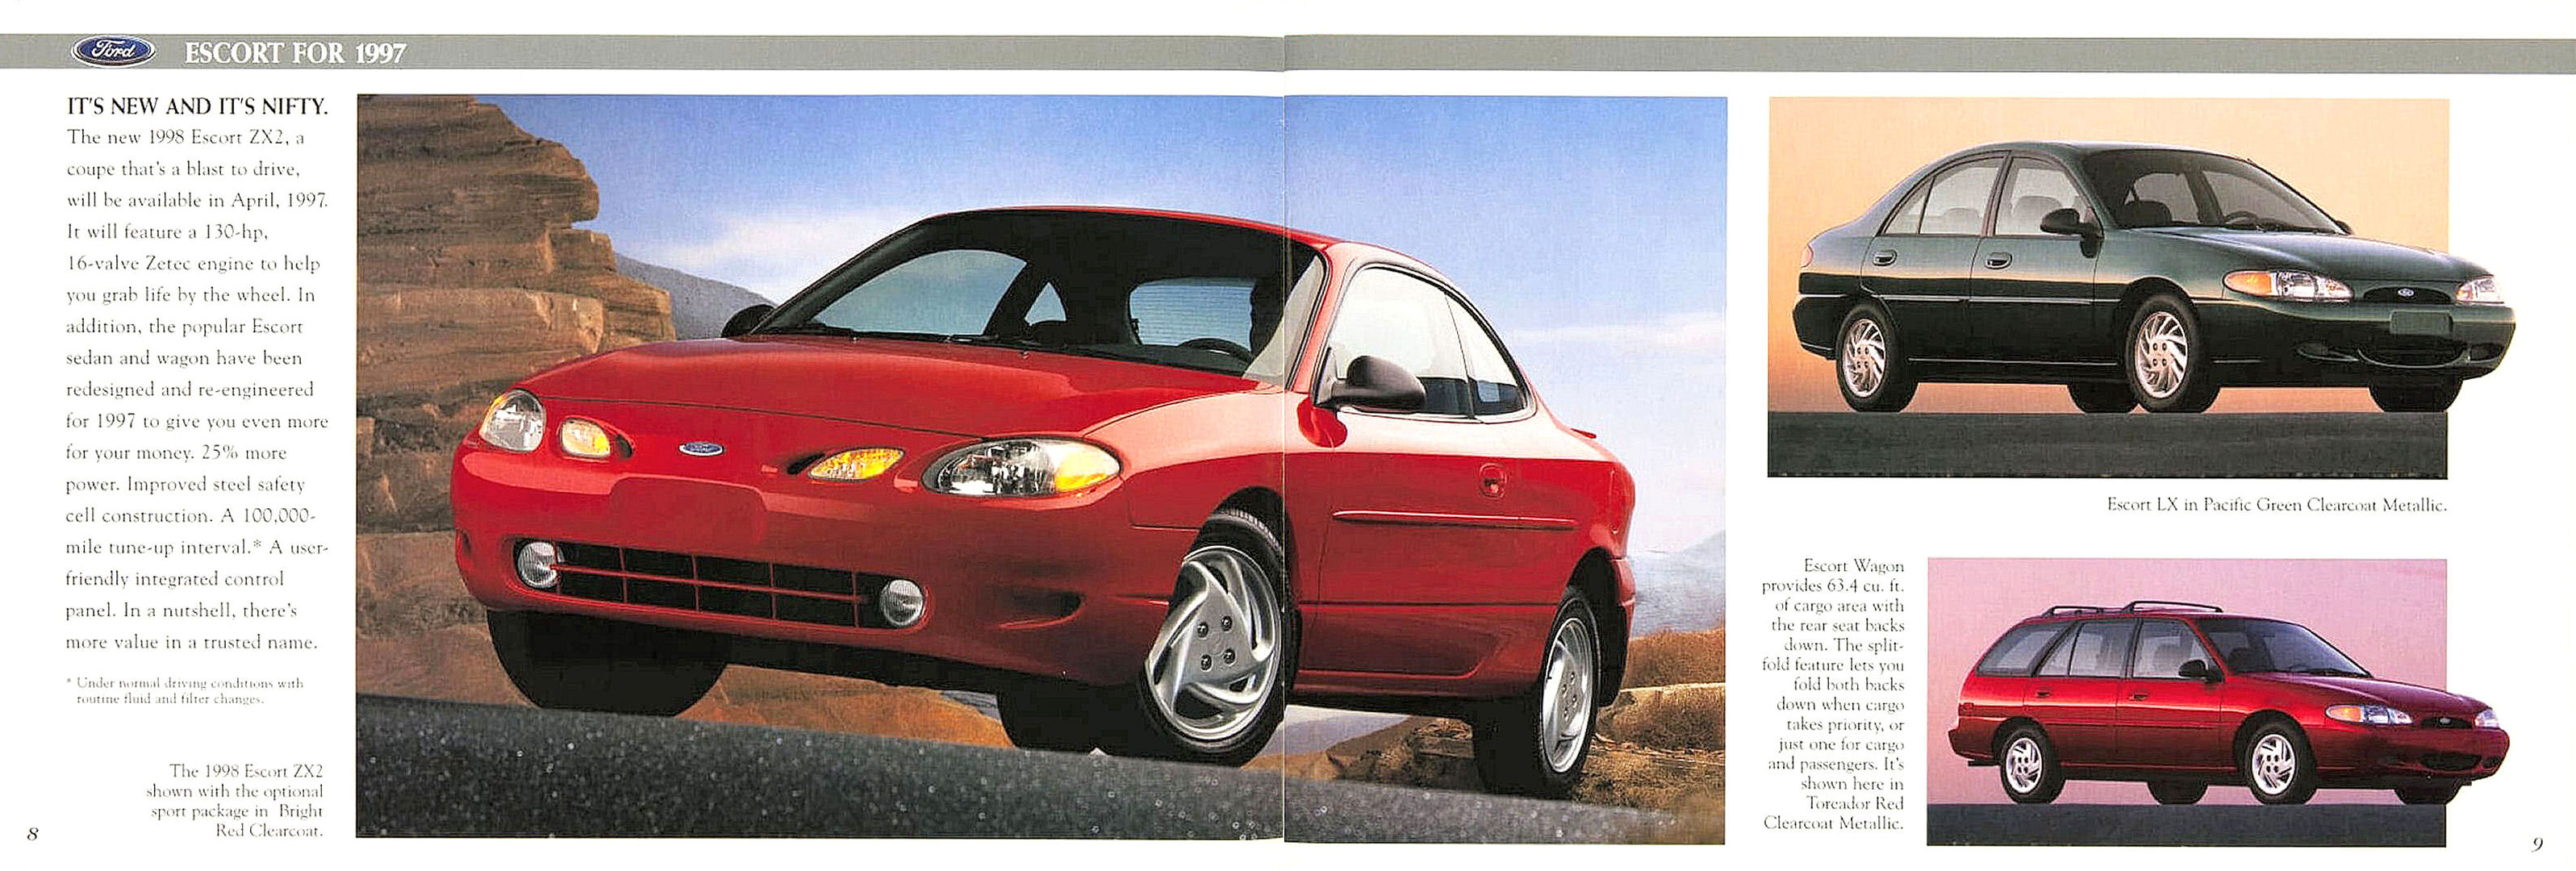 1997_Ford_Cars_and_Trucks_Rev-08-09